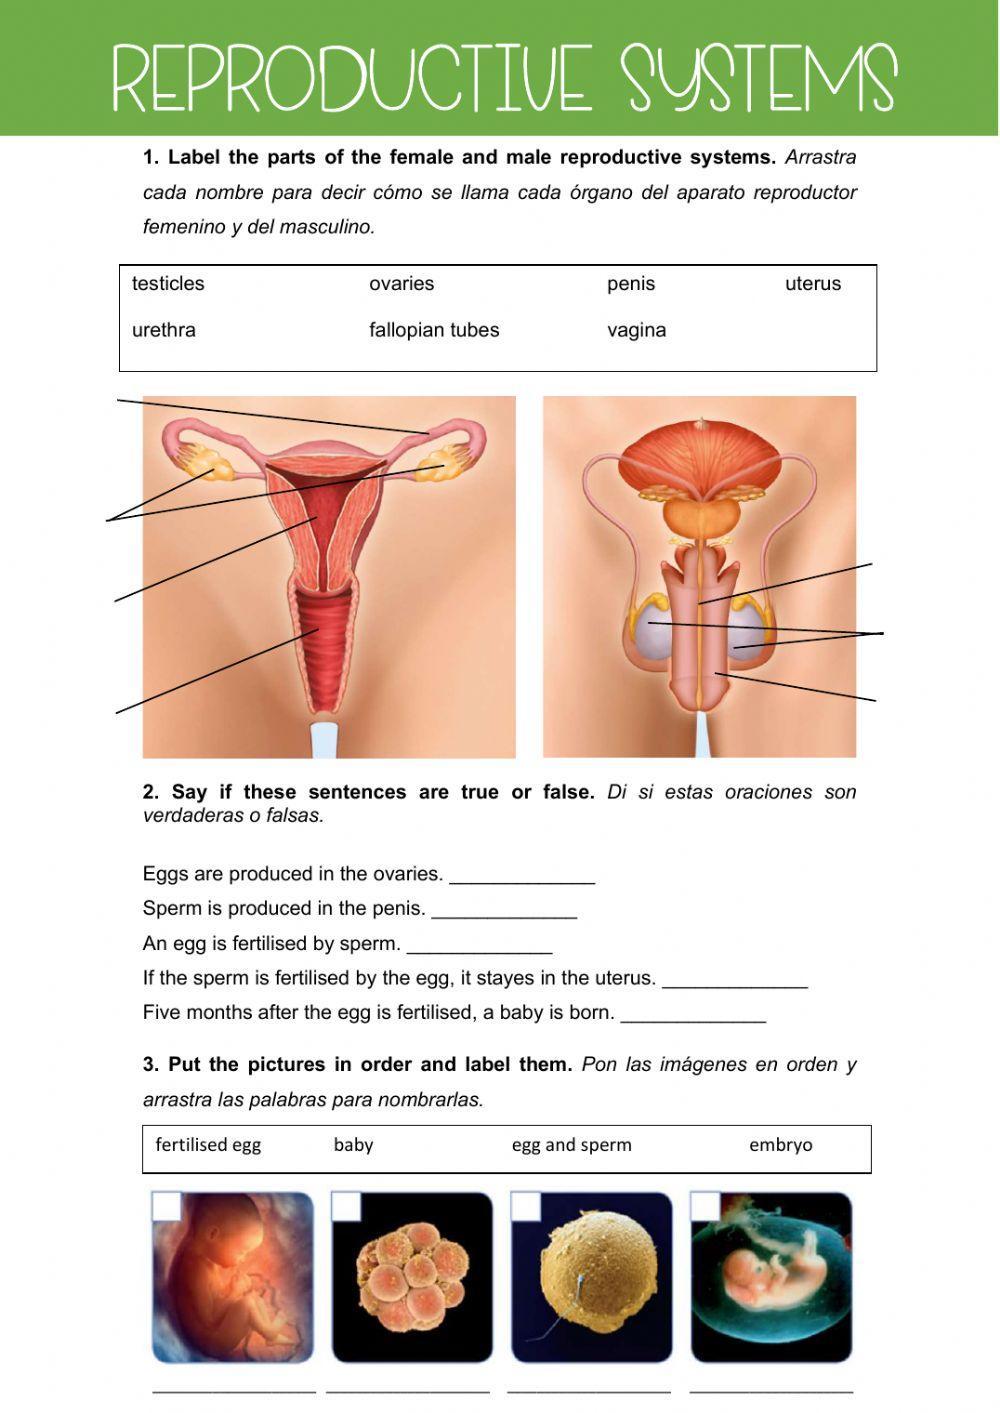 Female and male reproductive systems